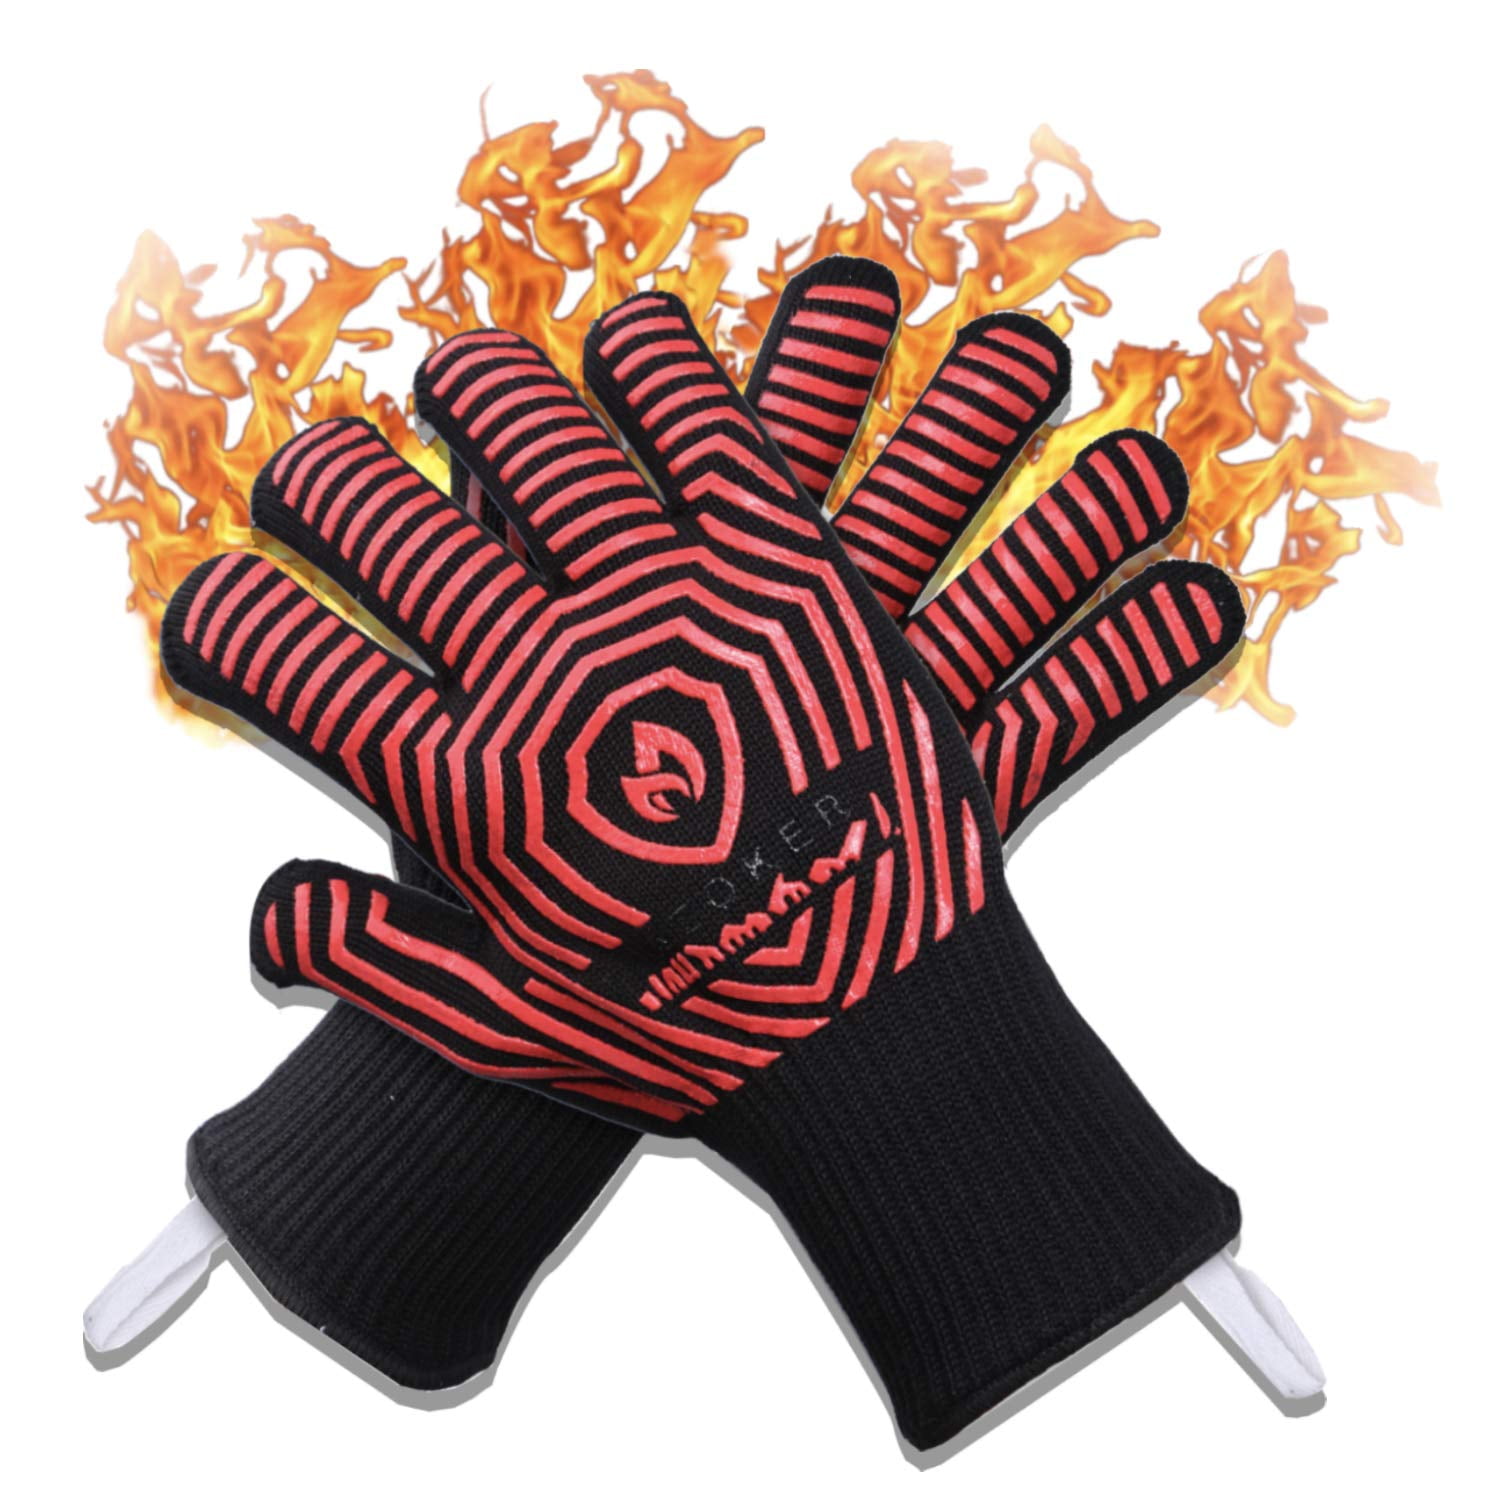 932°F Silicone Extreme Heat Resistant Proof Cooking Oven Mitt BBQ Grilling 